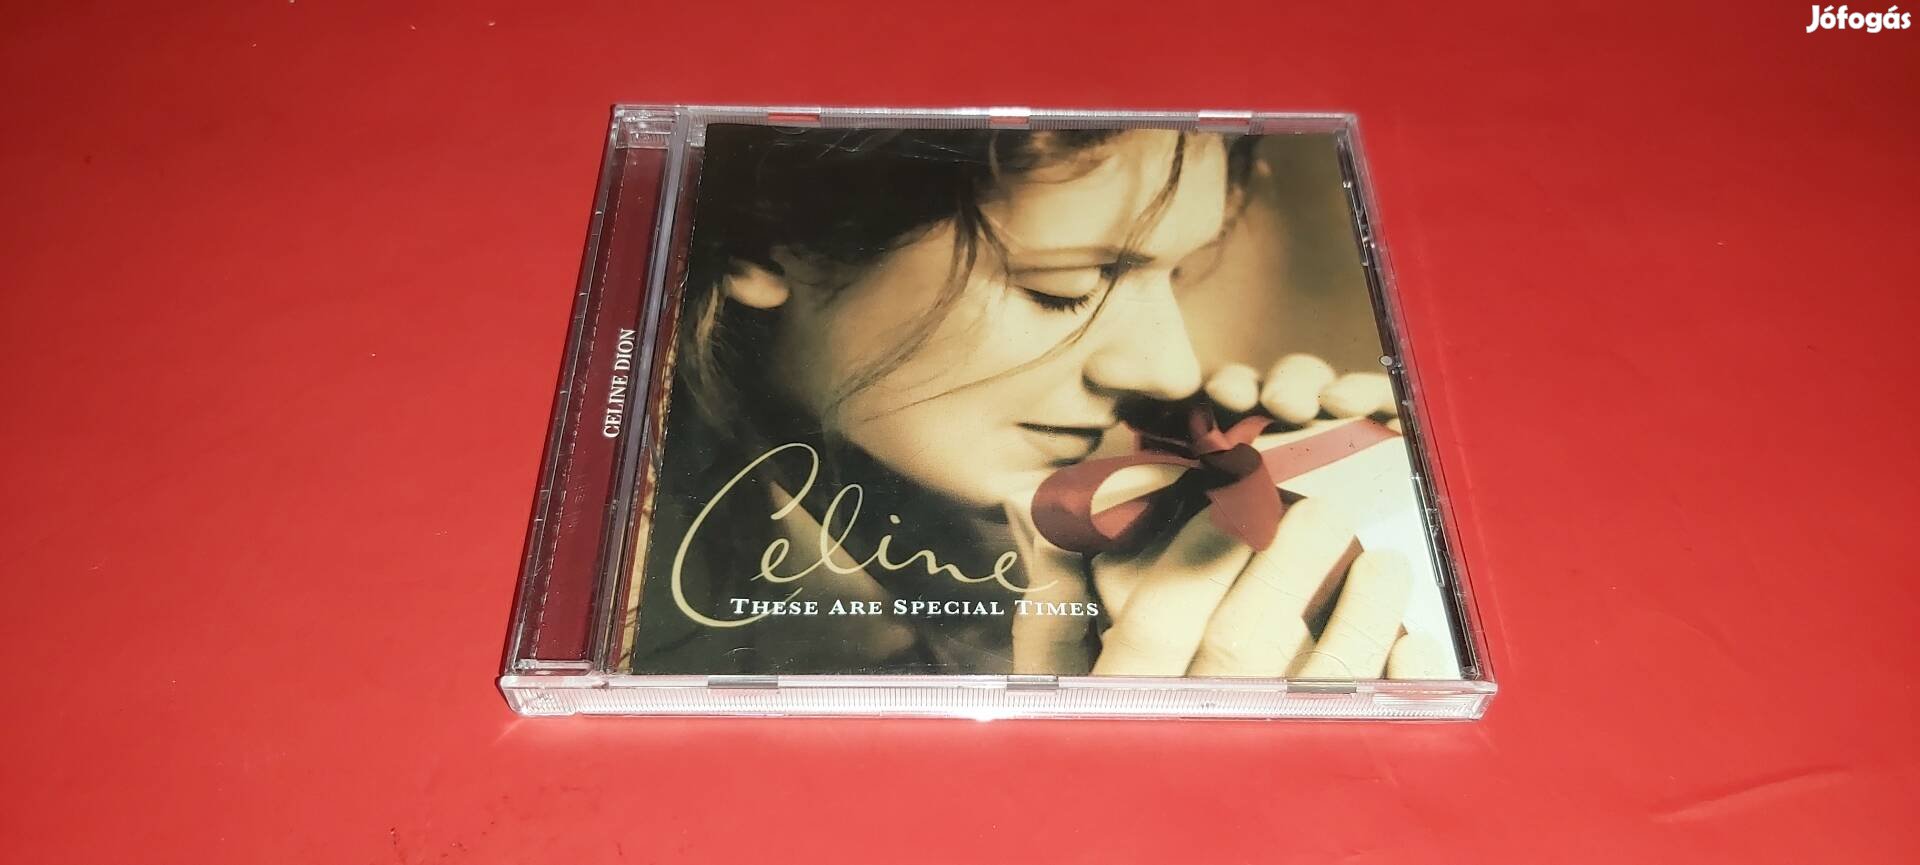 Celine Dion These are special times Cd 1998